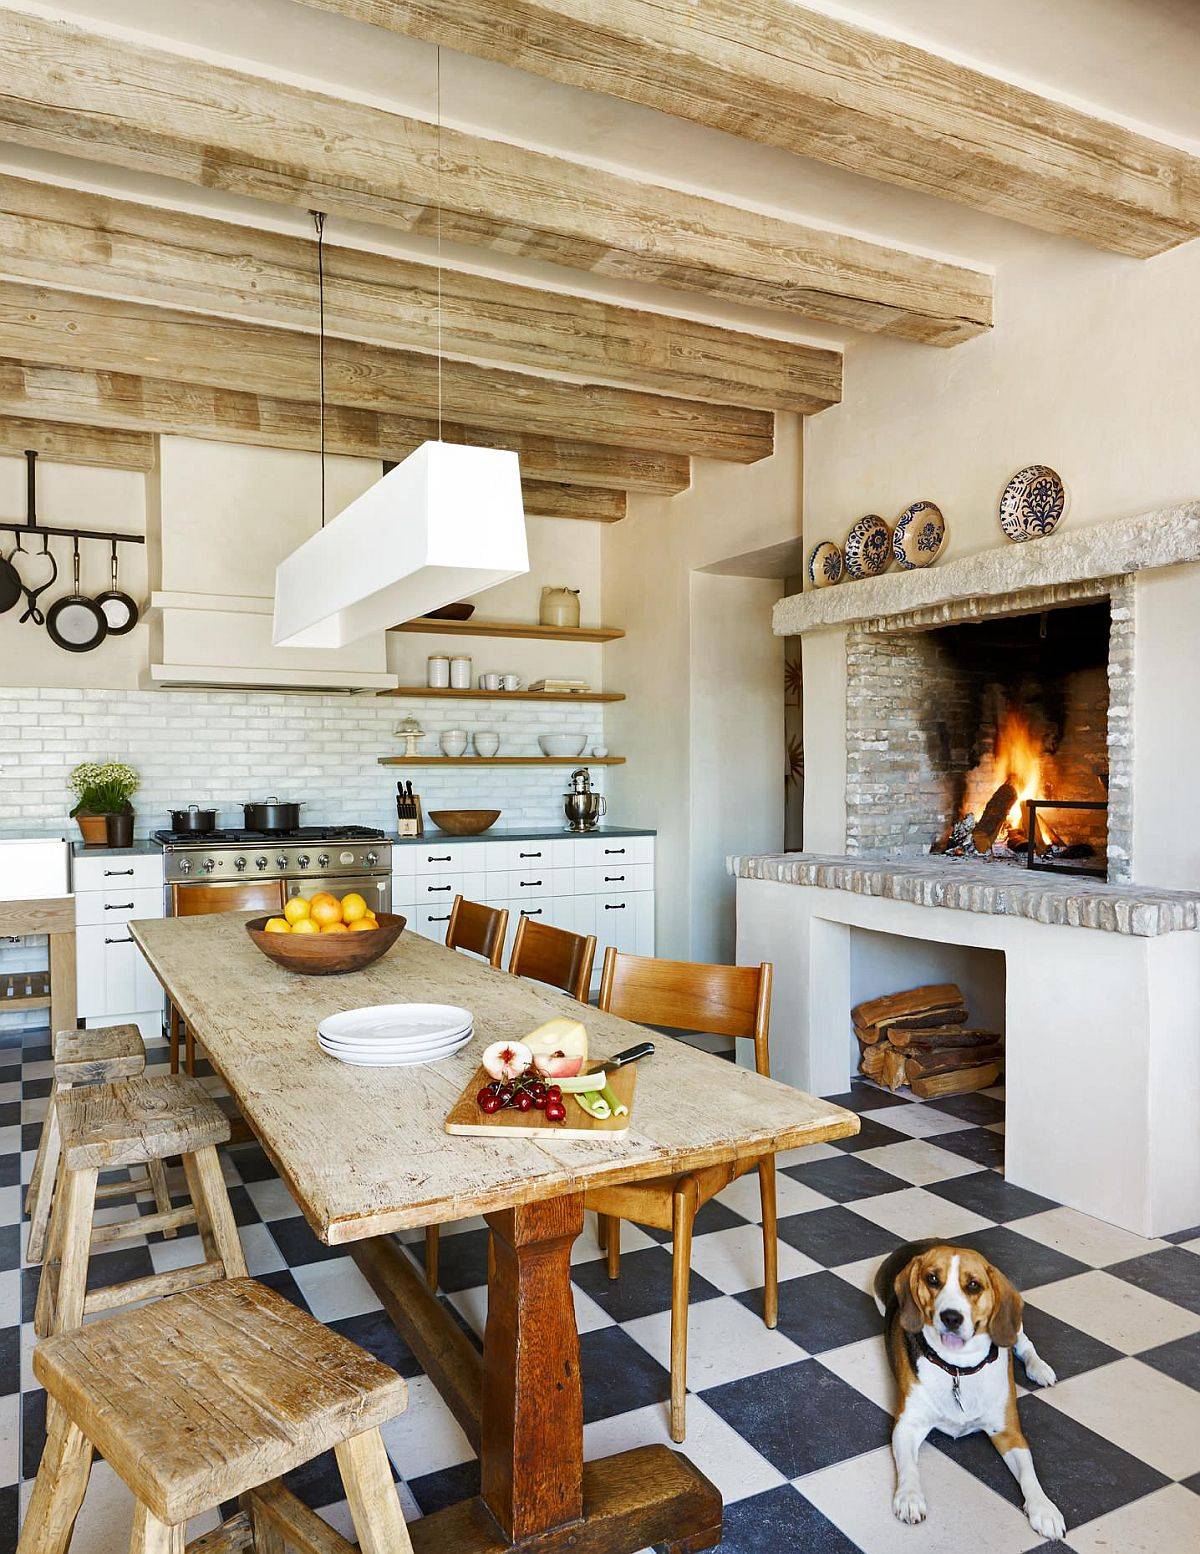 Rustic eat-in kitchen with Mediterranean touches, exposed ceiling beams and a fireplace